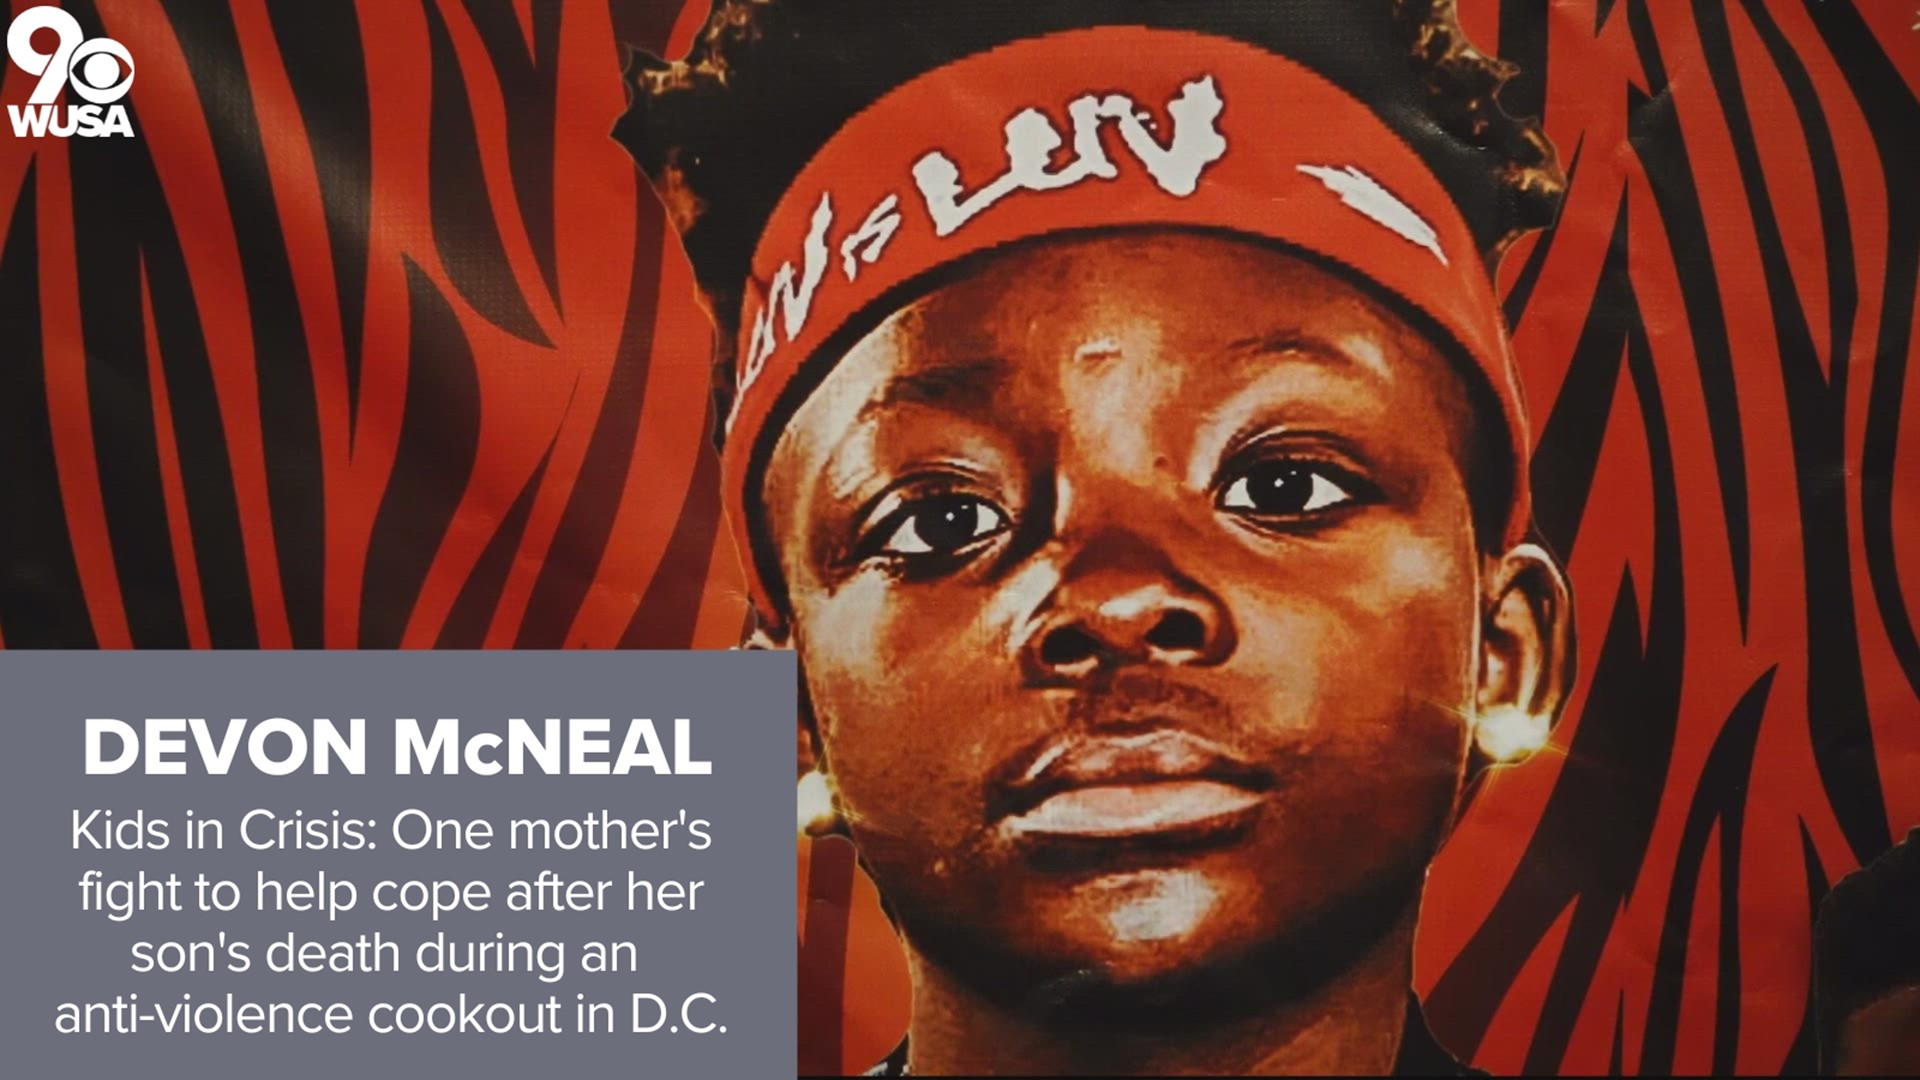 One mother is fighting to help everyone cope after her son's death during an anti-violence cookout in D.C.